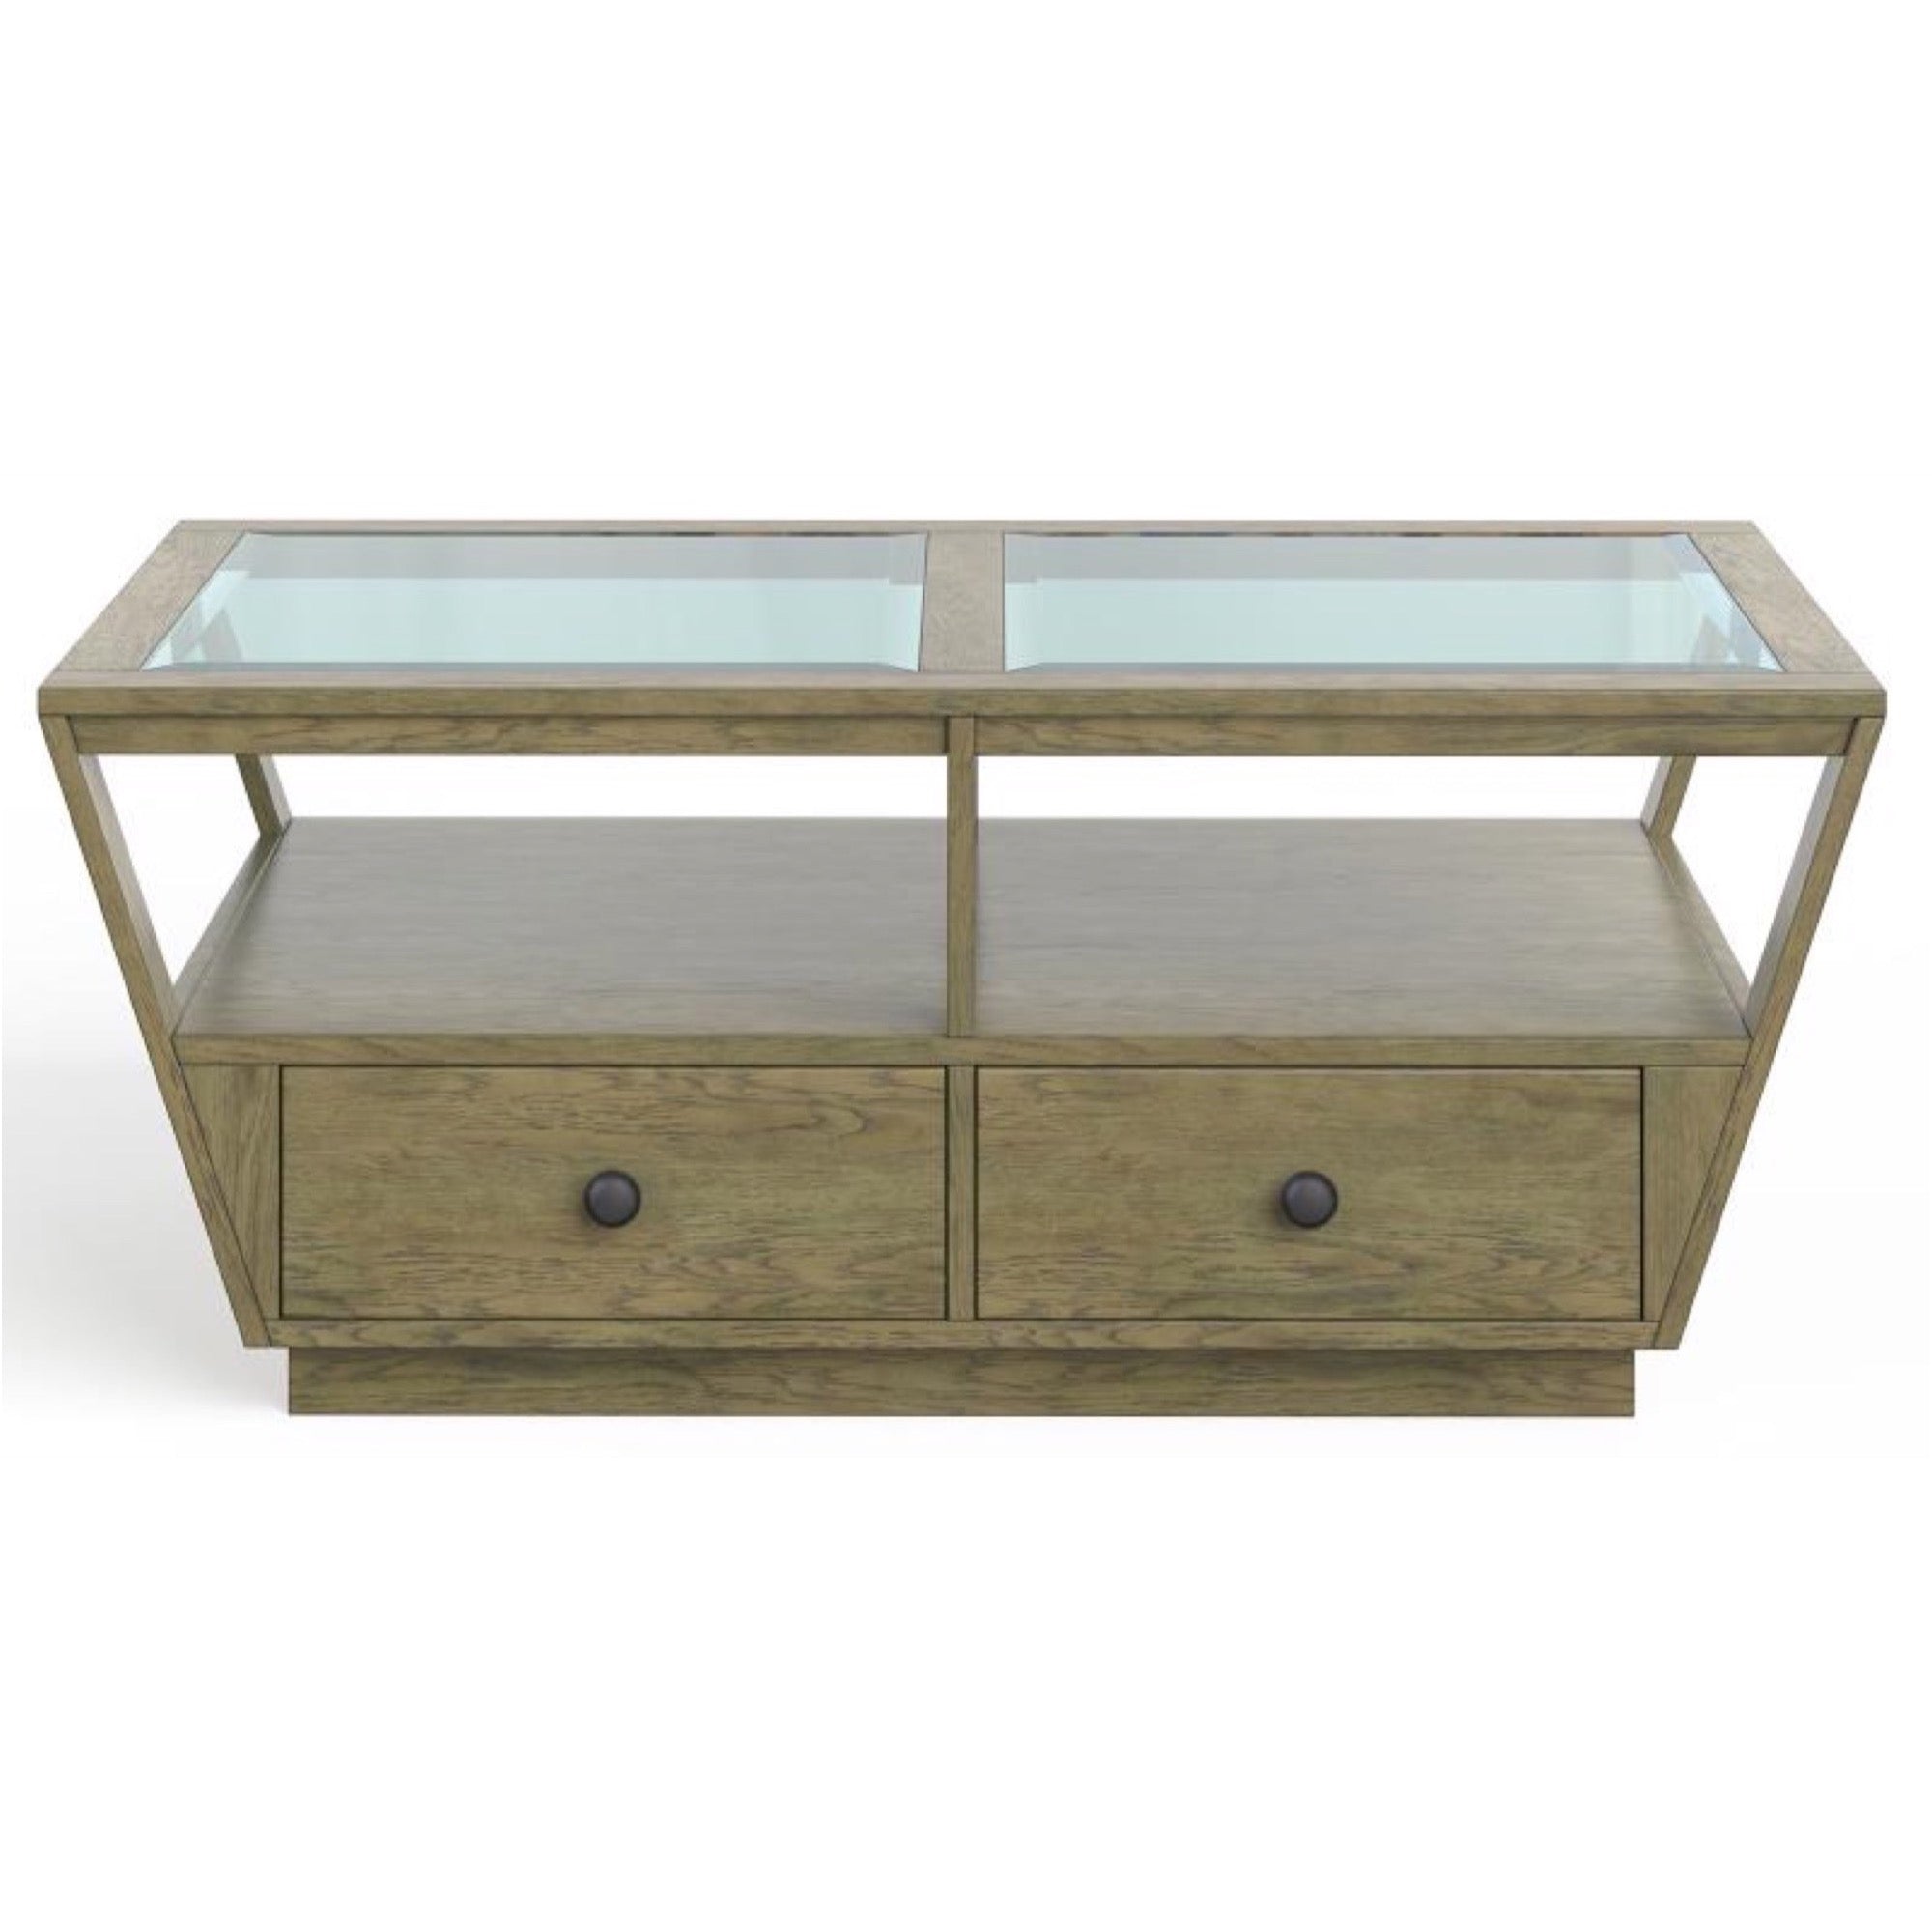 Hardison Rectangular Cocktail Table w/Casters